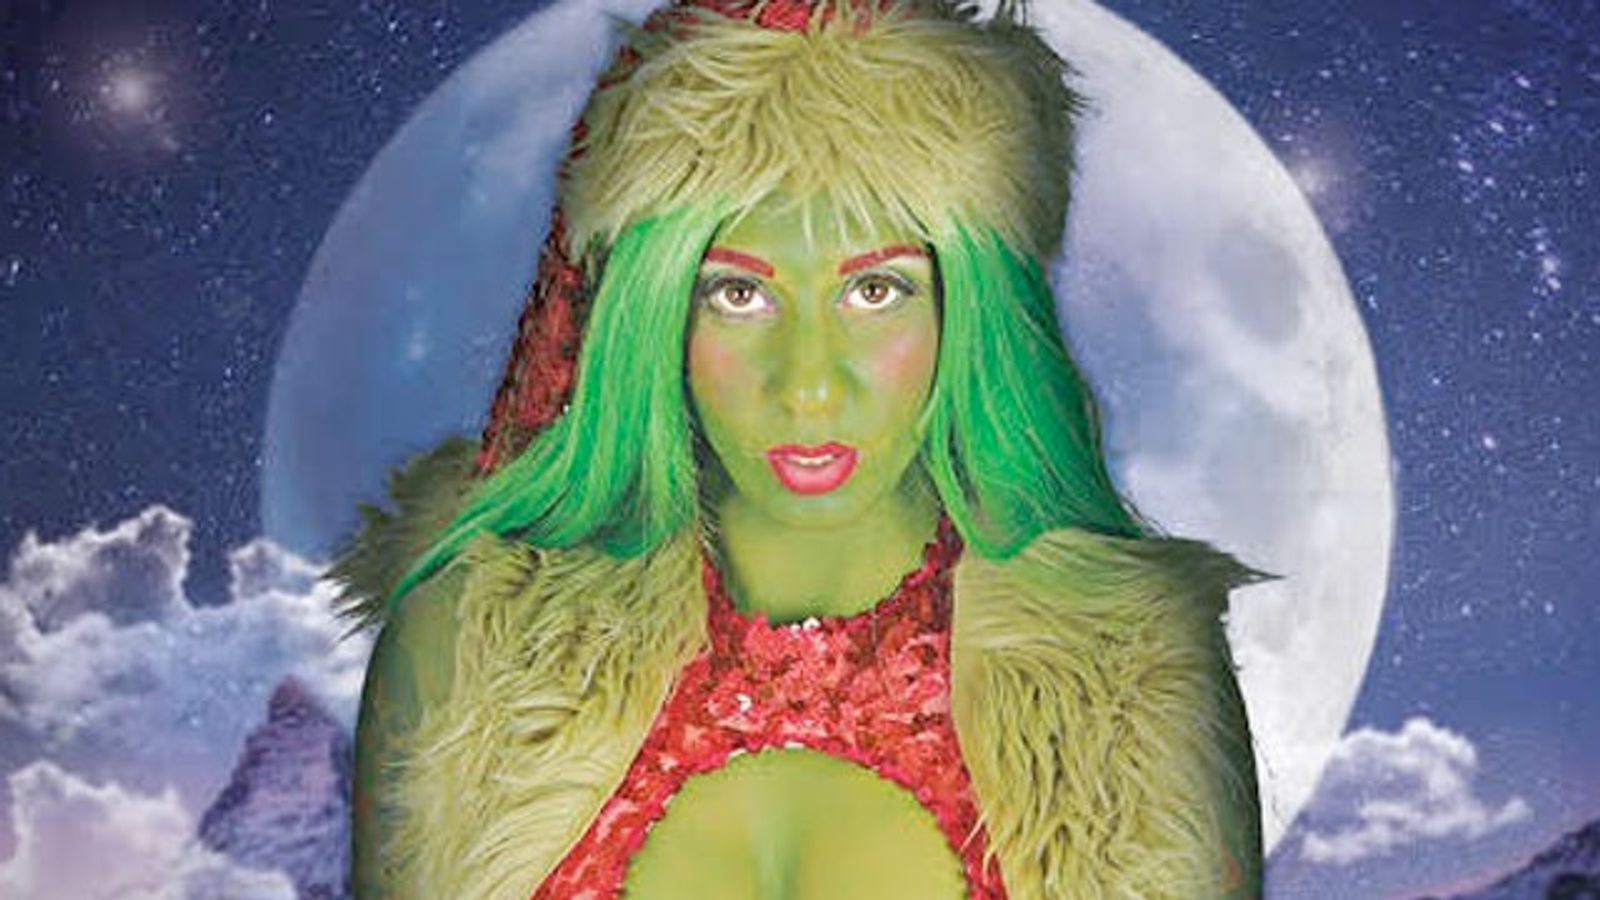 Joanna Angel Shows 'How the Grinch Gaped Christmas'